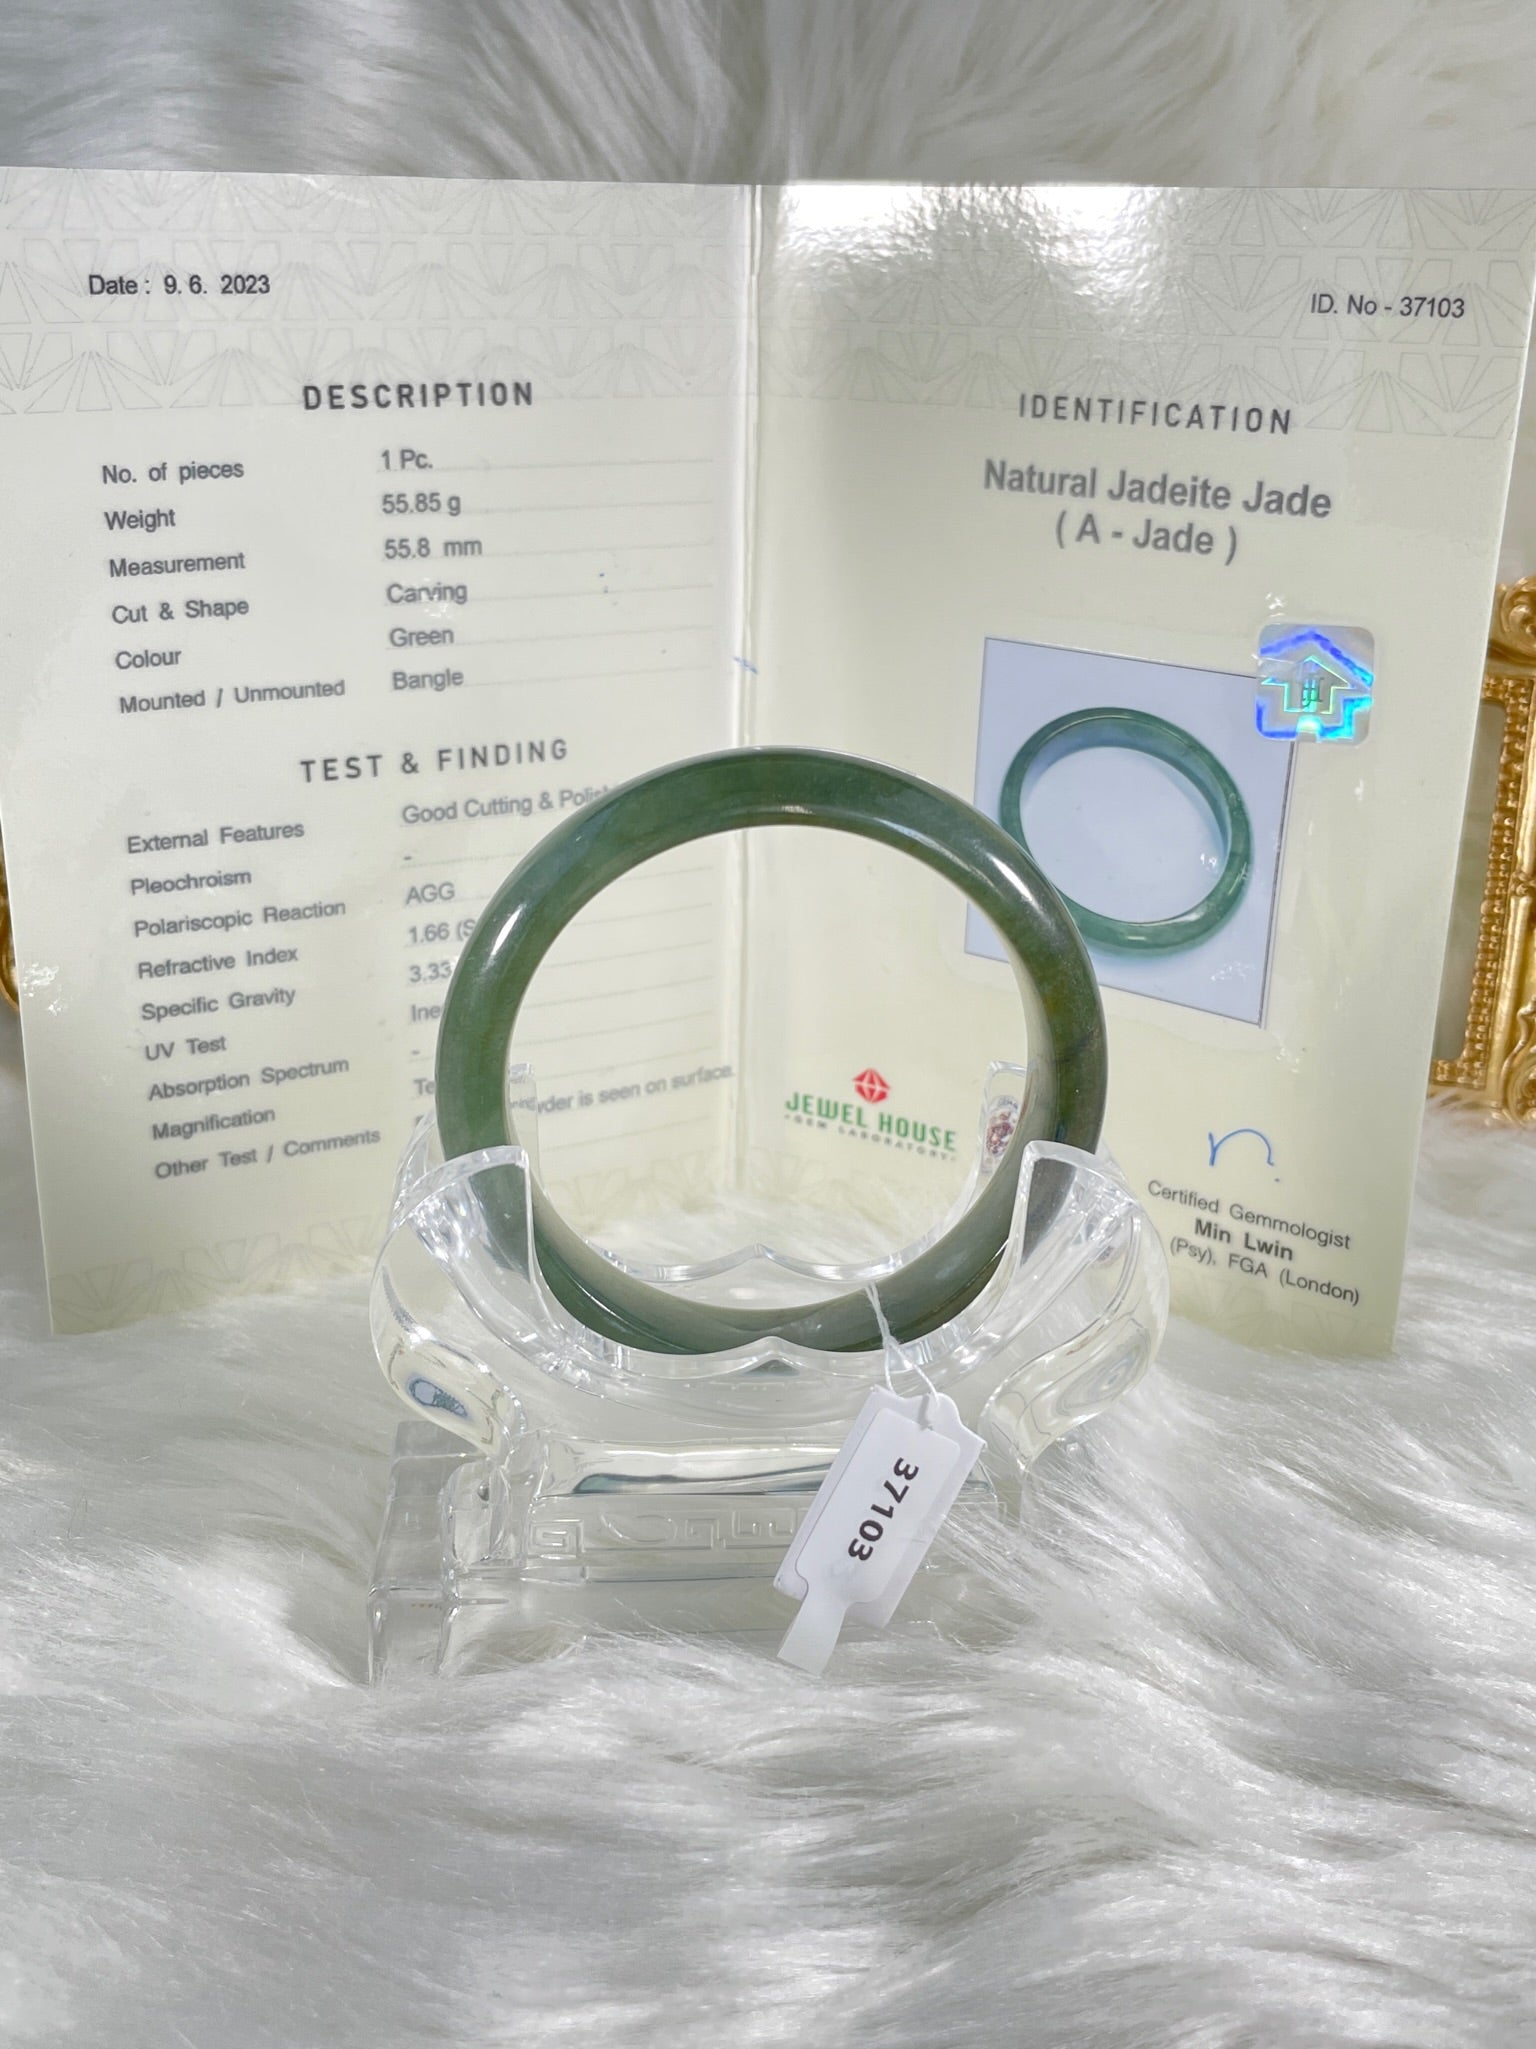 Grade A Natural Jade Bangle with certificate #37103